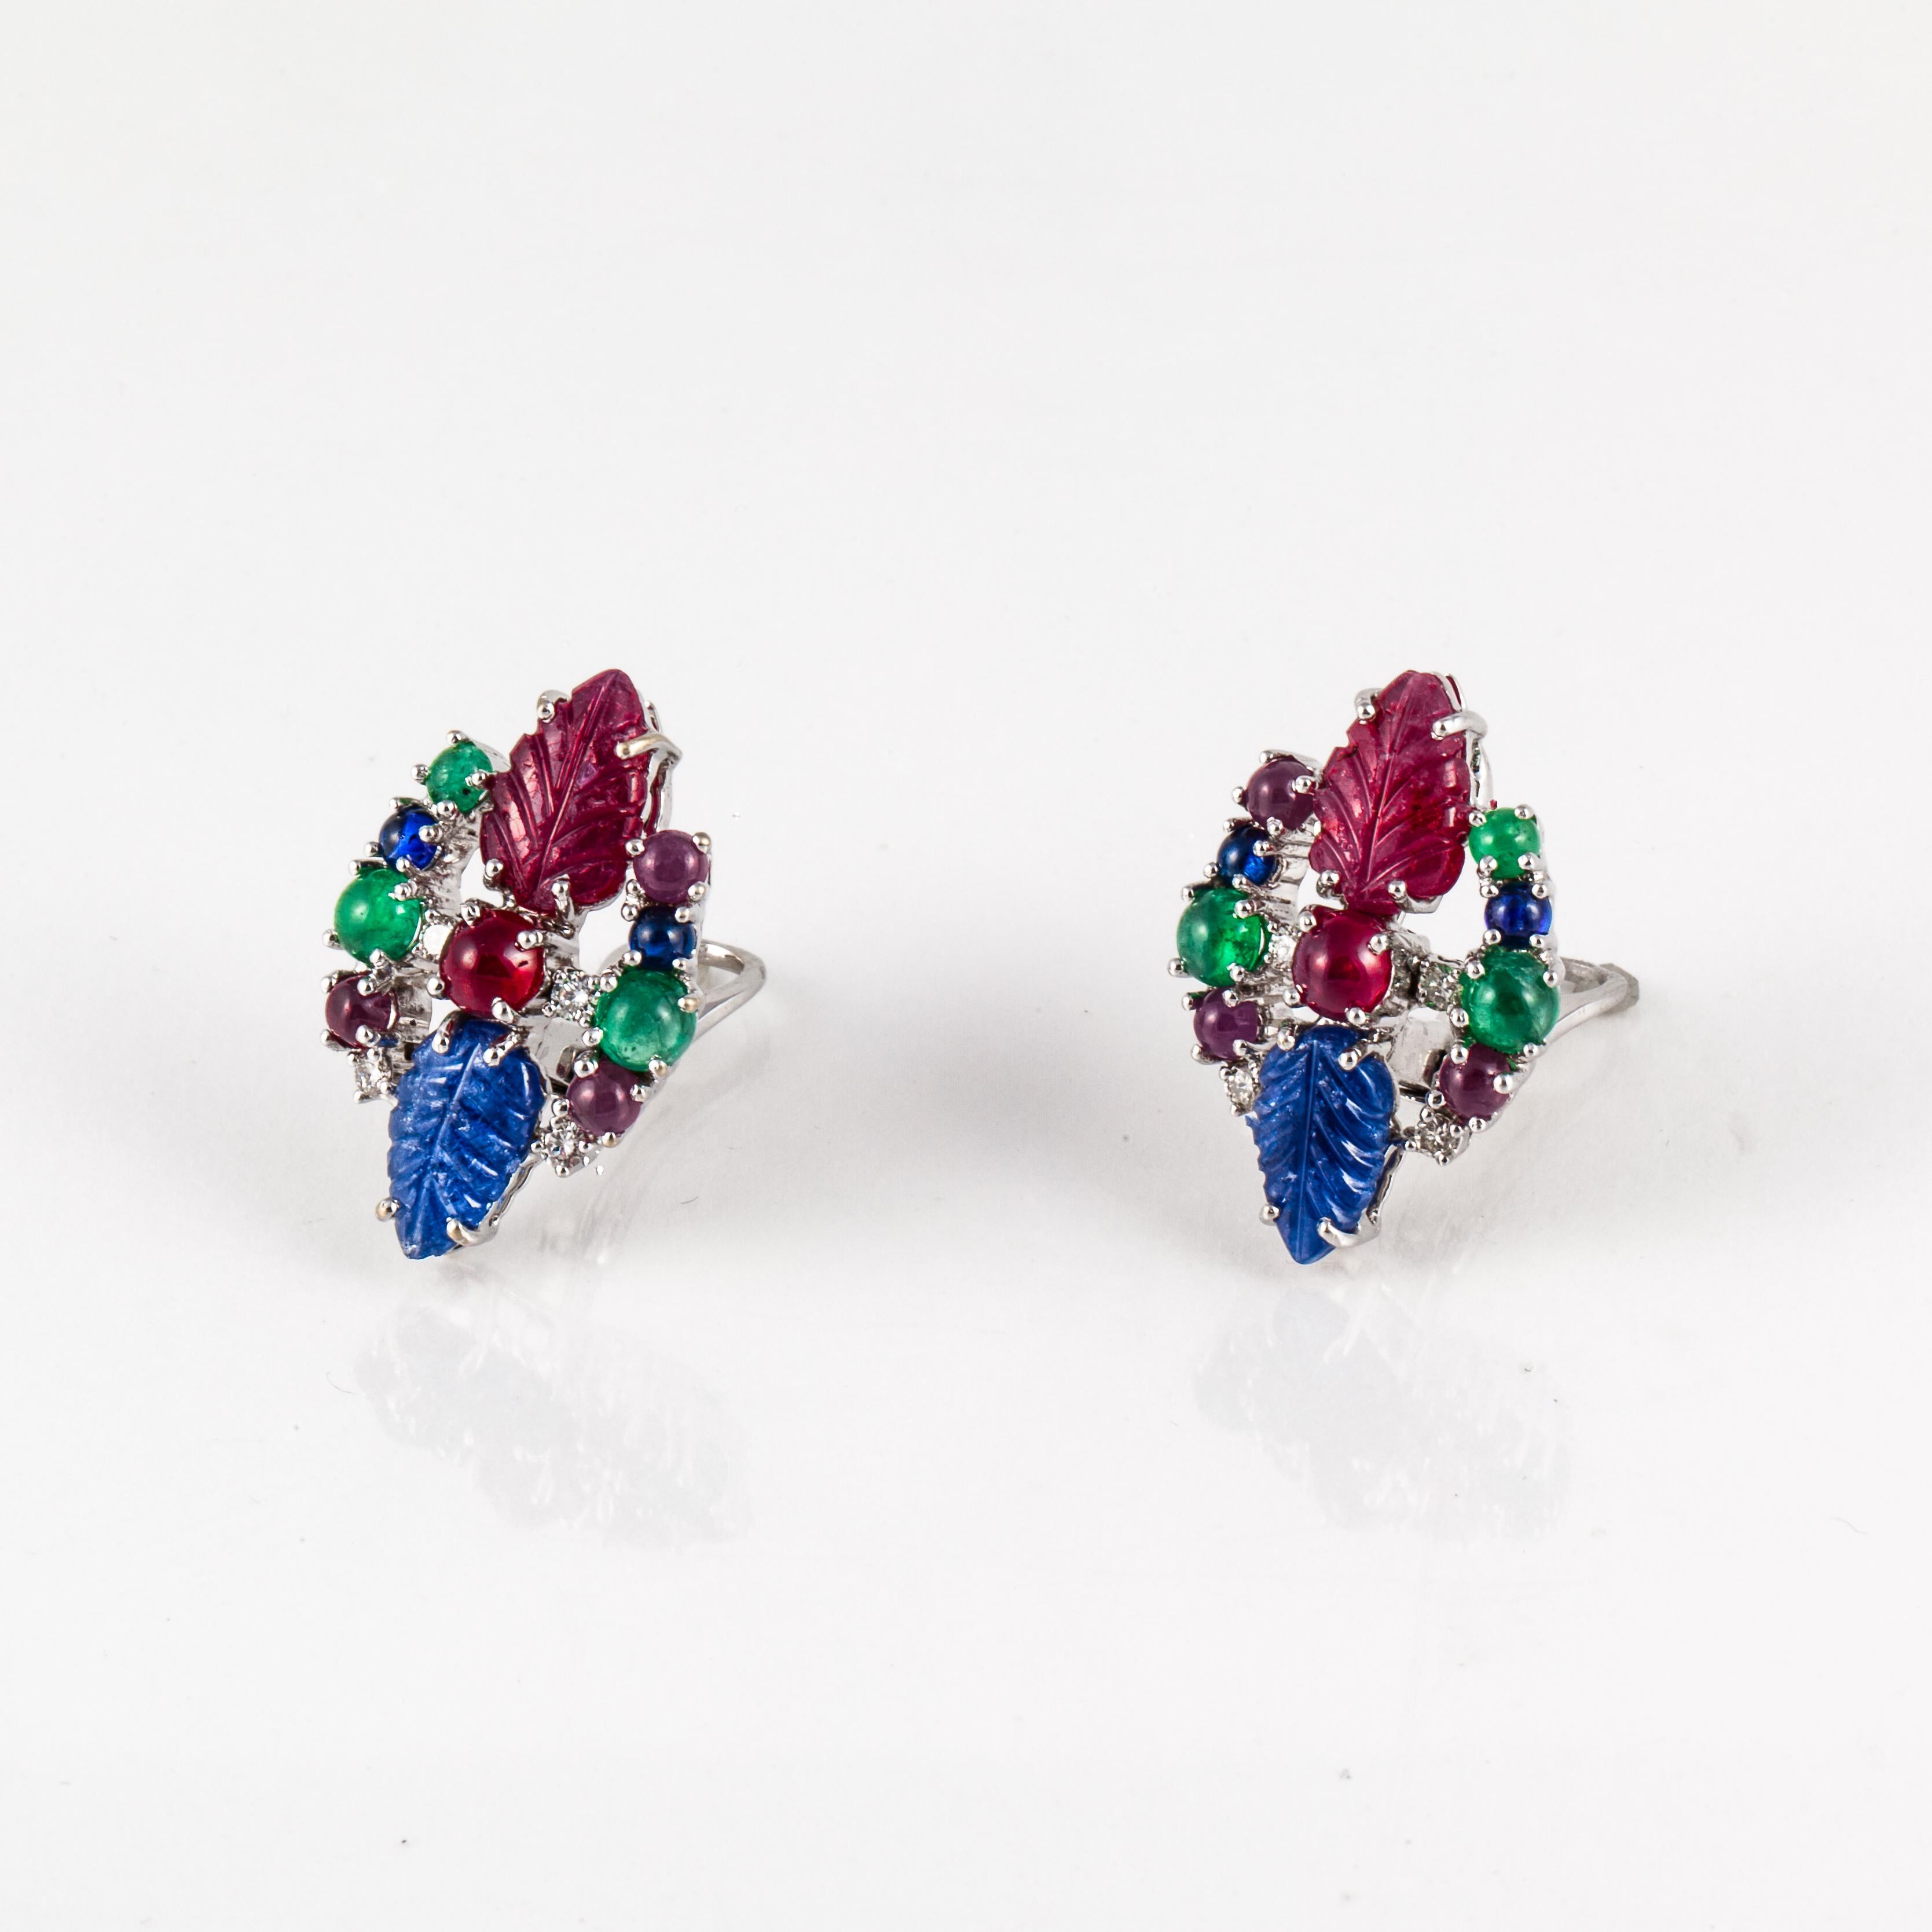 Art Deco tutti-frutti style earrings in 18K white gold with cabochon emeralds, rubies and sapphires and accented by round diamonds.   Total diamond weight is 0.65 carats.  They have drop down posts with clip backs.  Measure 1 1/8 inches by 3/4